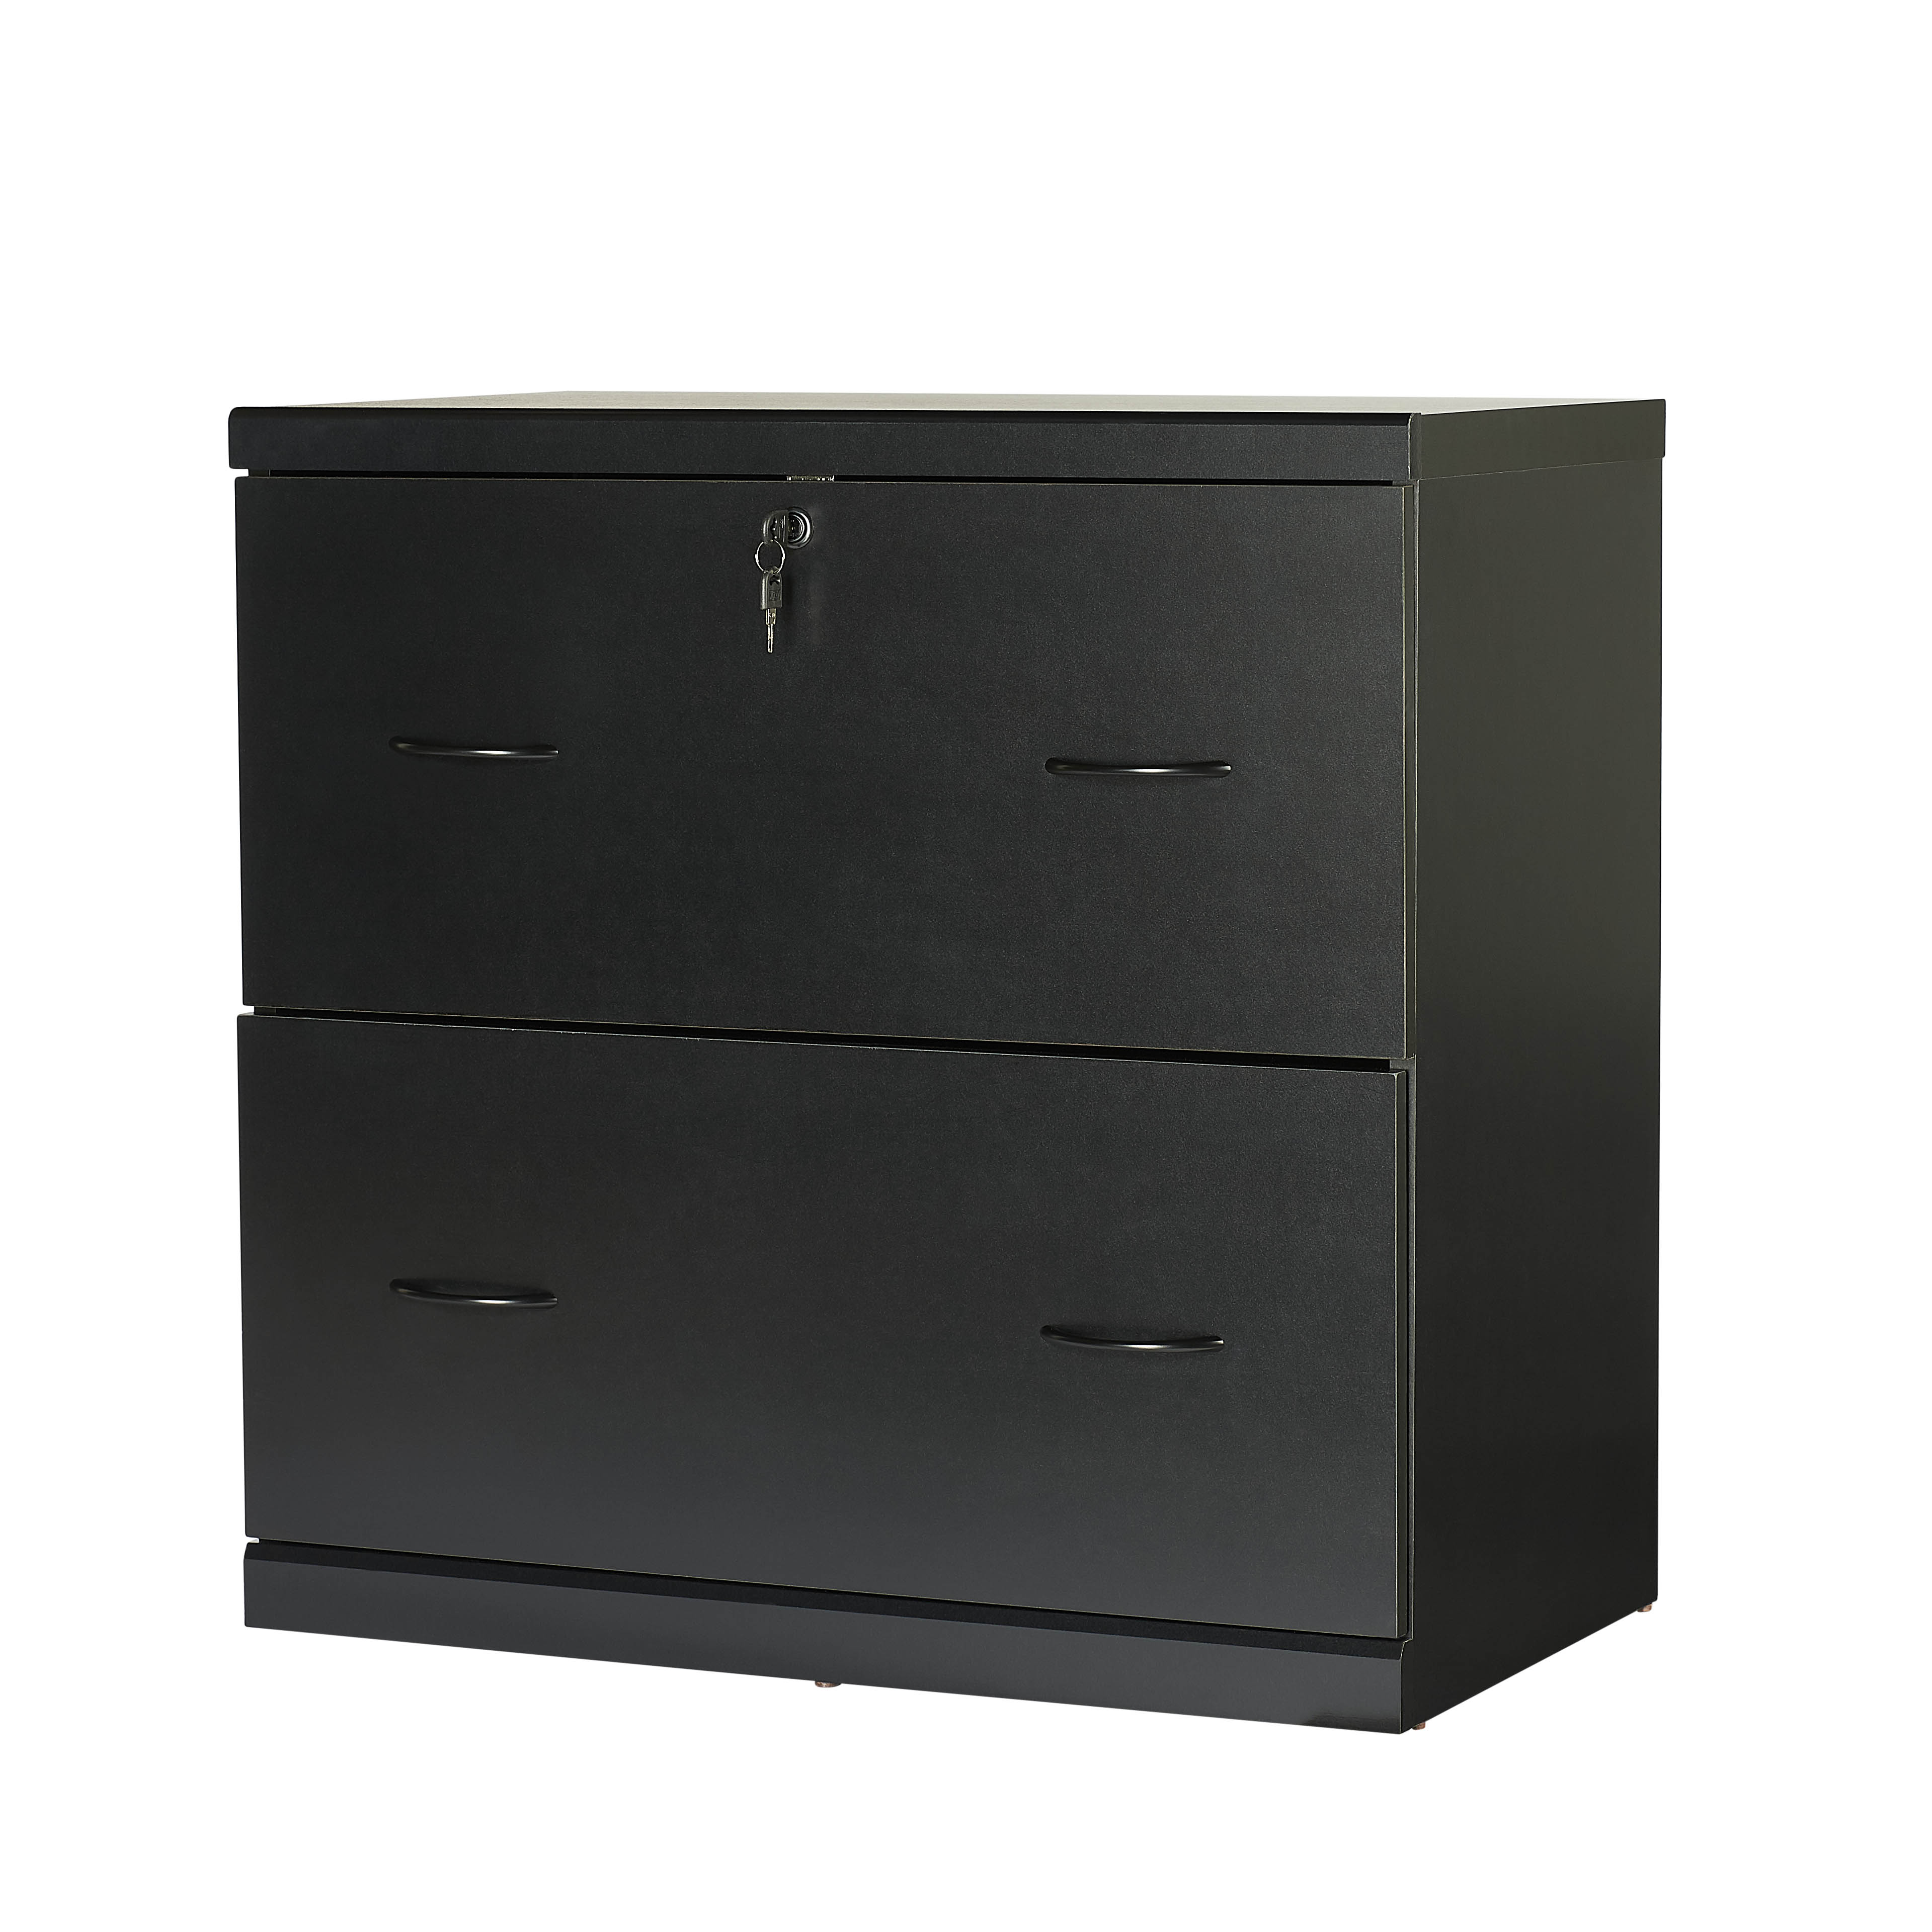 Mainstays 2 Drawer Lateral Locking File Cabinet Walmart inside size 3840 X 3840